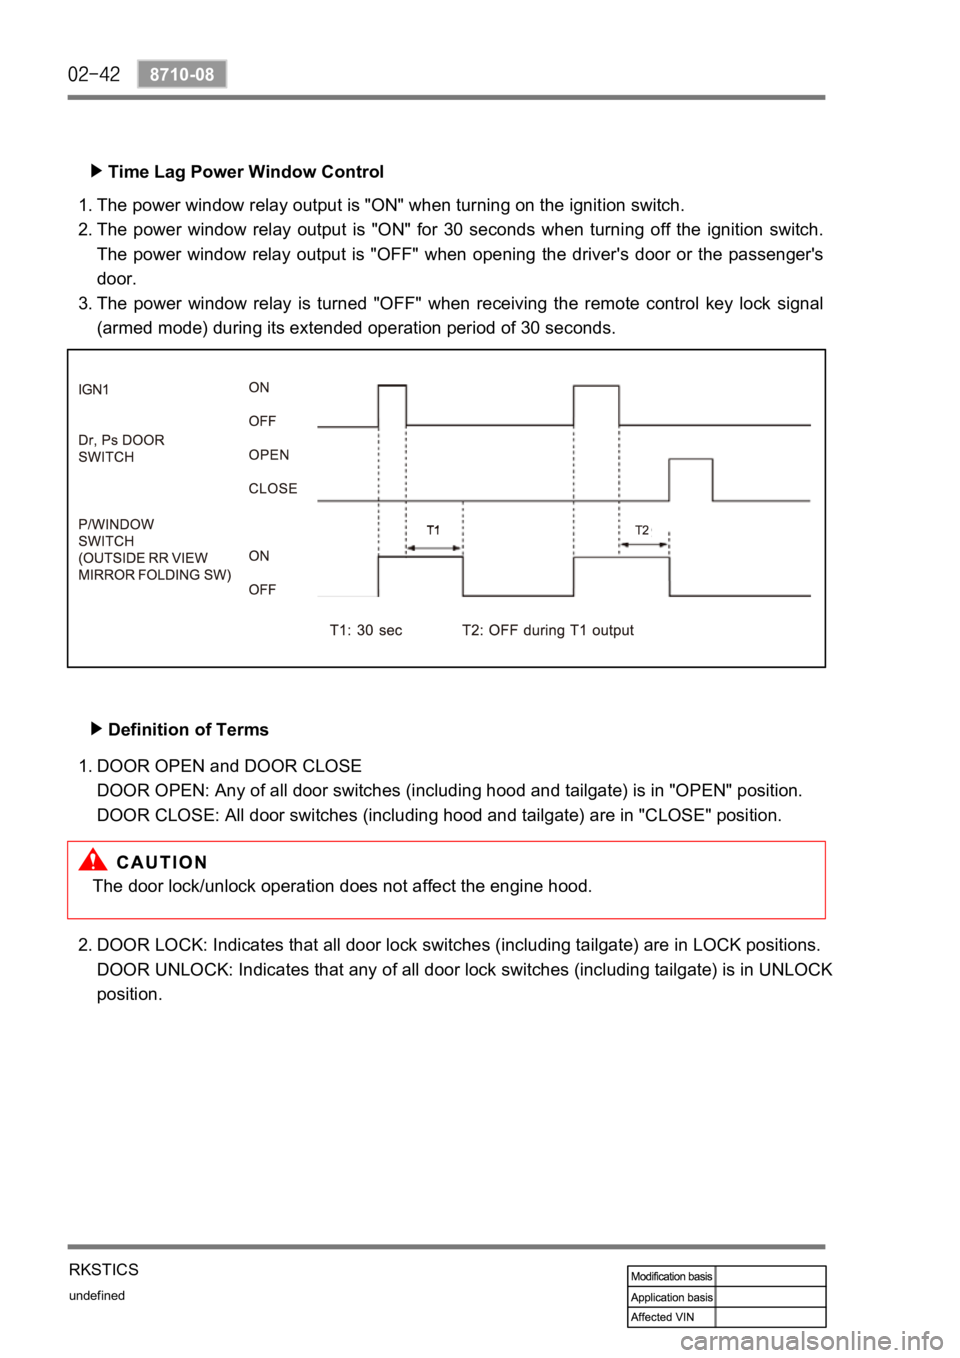 SSANGYONG REXTON 2006  Service Manual undefined
8710-08
RKSTICS
Time Lag Power Window Control
The power window relay output is "ON" when turning on the ignition switch.
The  power  window  relay  output  is  "ON"  for  30 